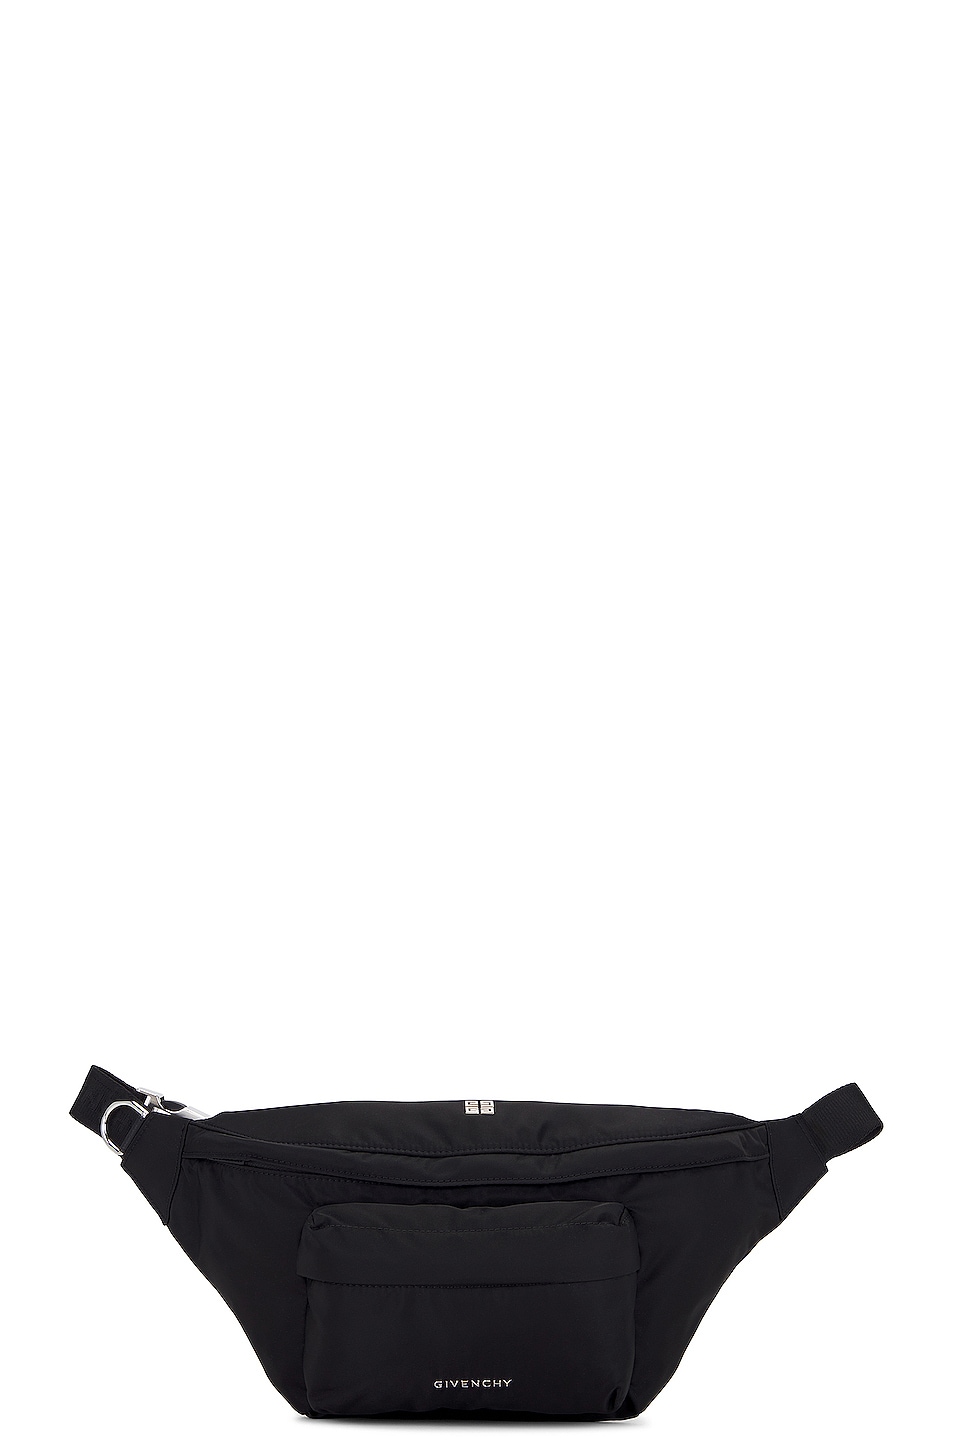 Givenchy Essential U Bumbag in Black